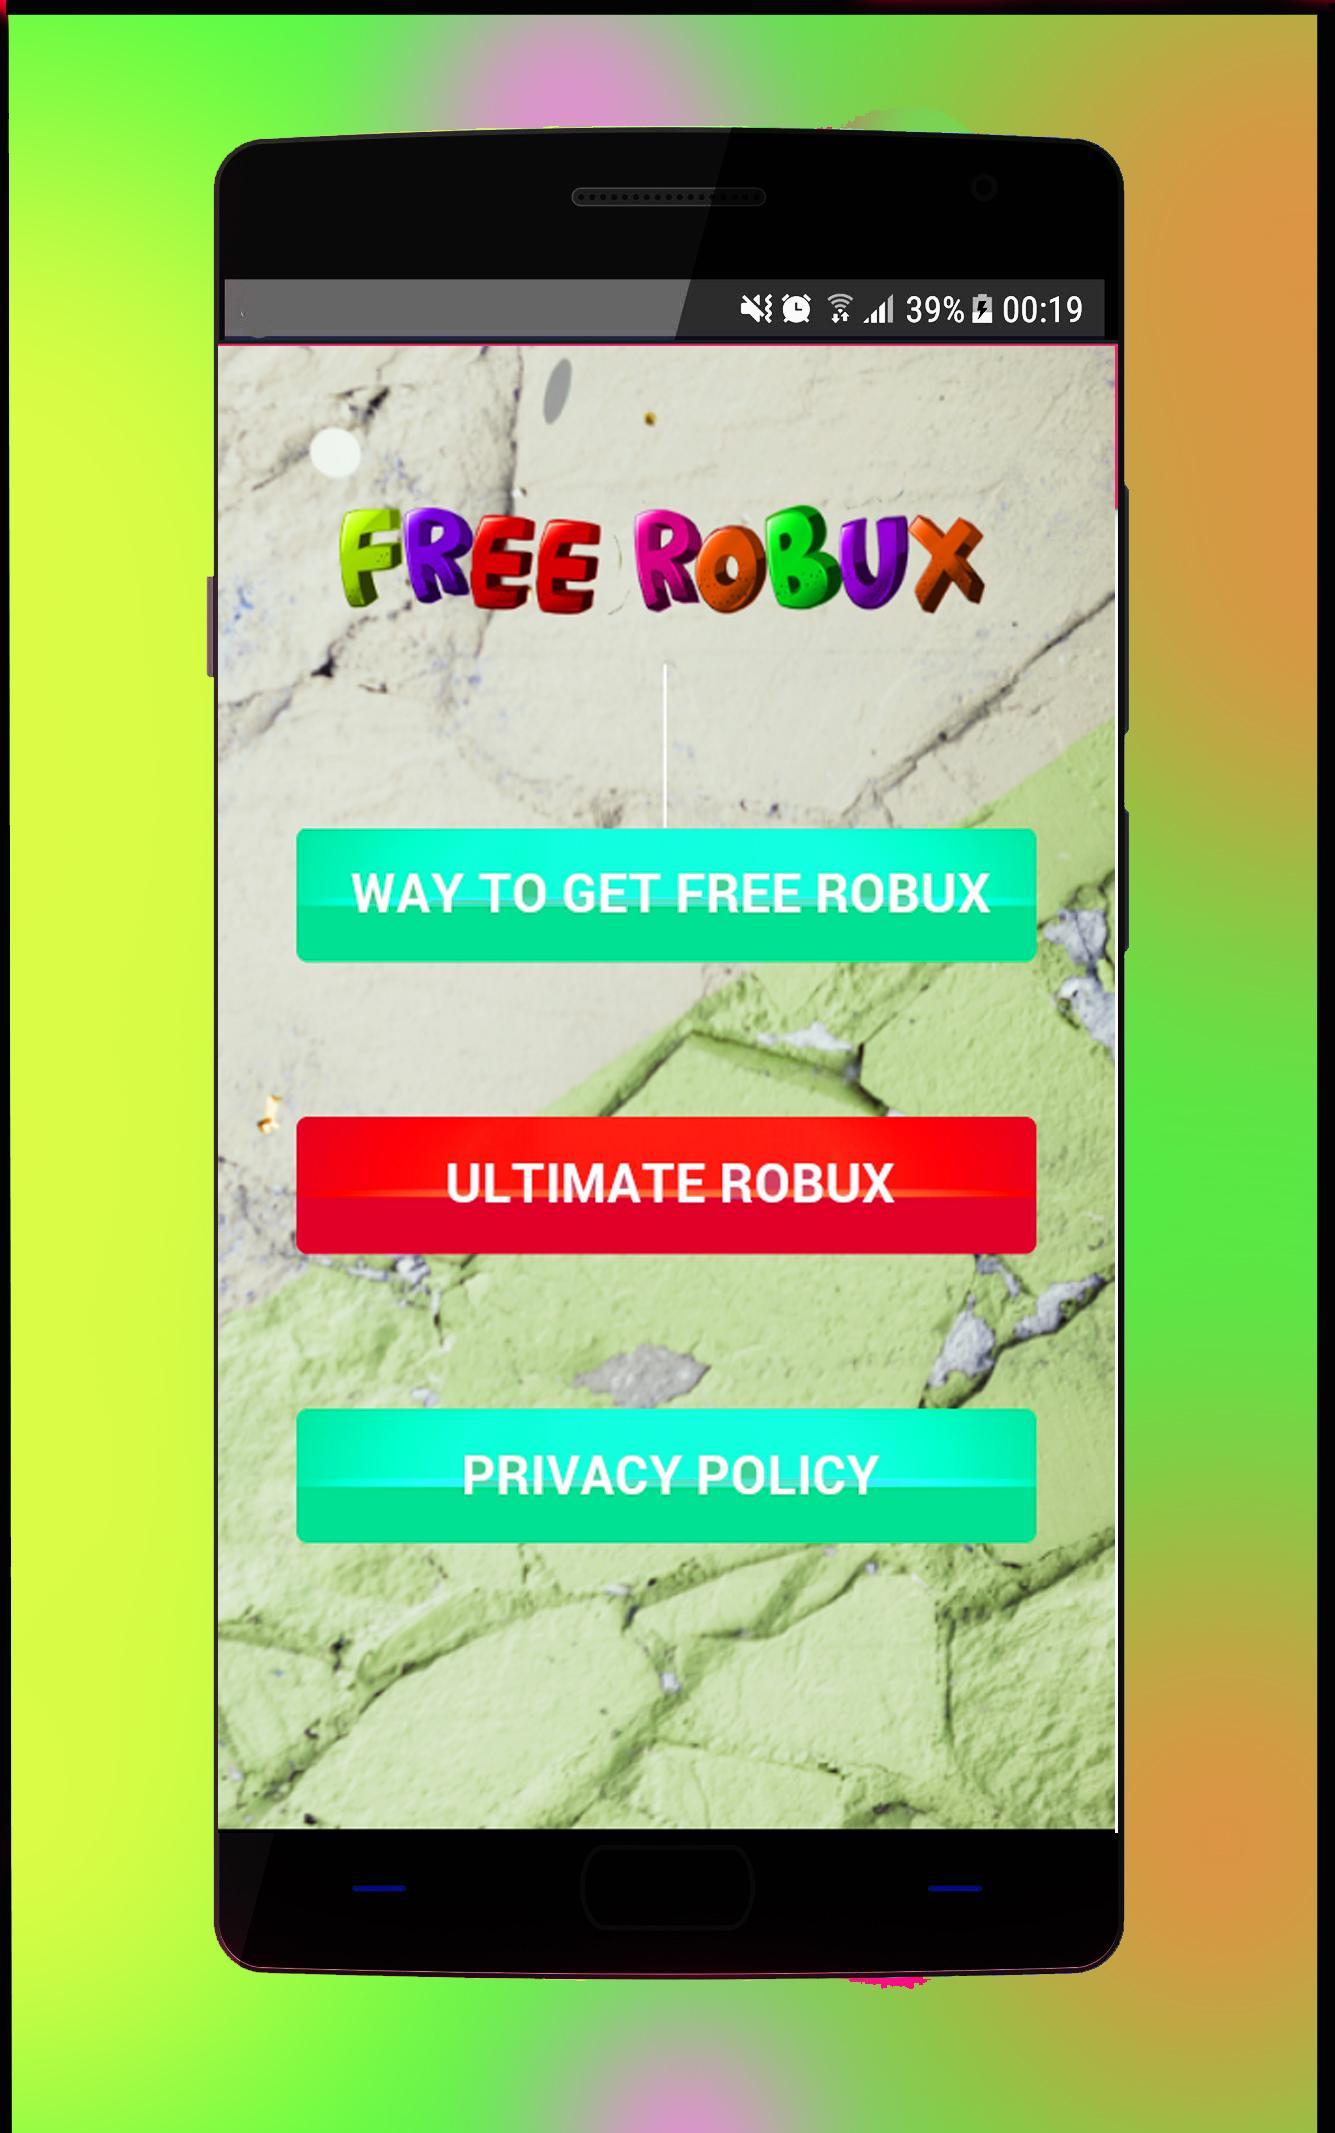 How to get free robux 2019 on iphone